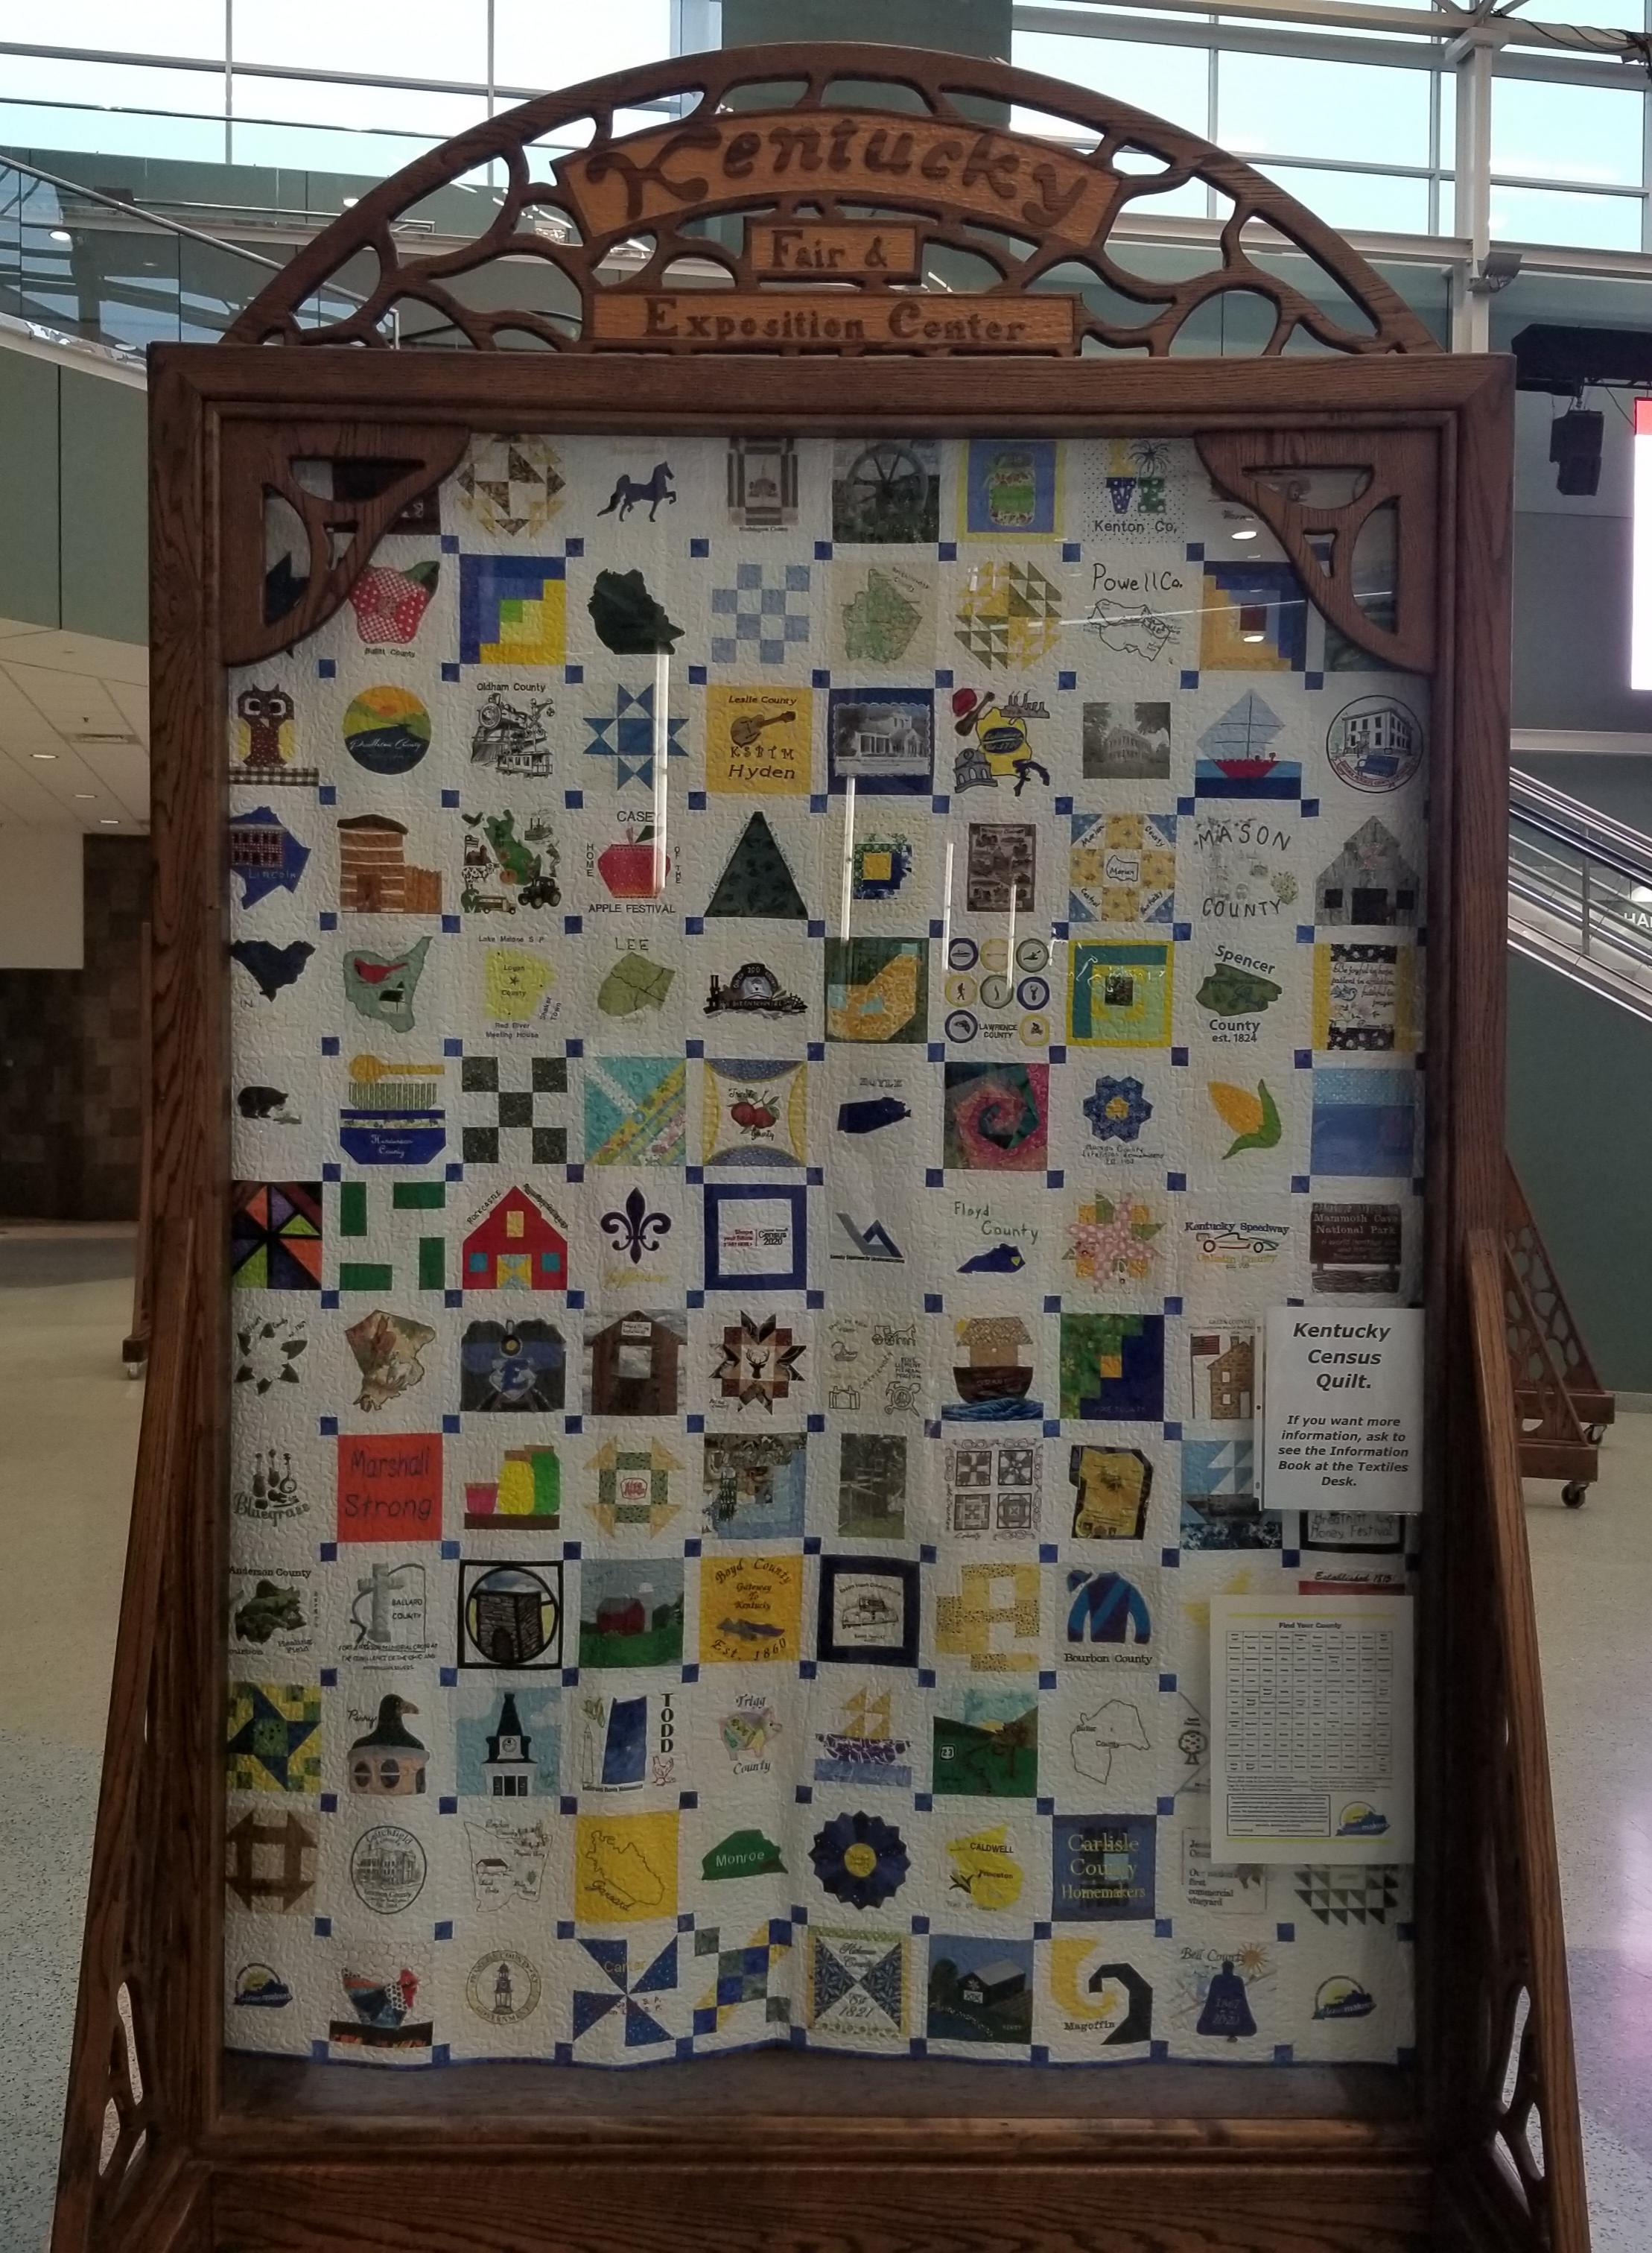 The 2020 Kentucky Census quilt will now hang in the Kentucky Department for Libraries and Archives, located in Frankfort. Photo by Jordan Strickler.